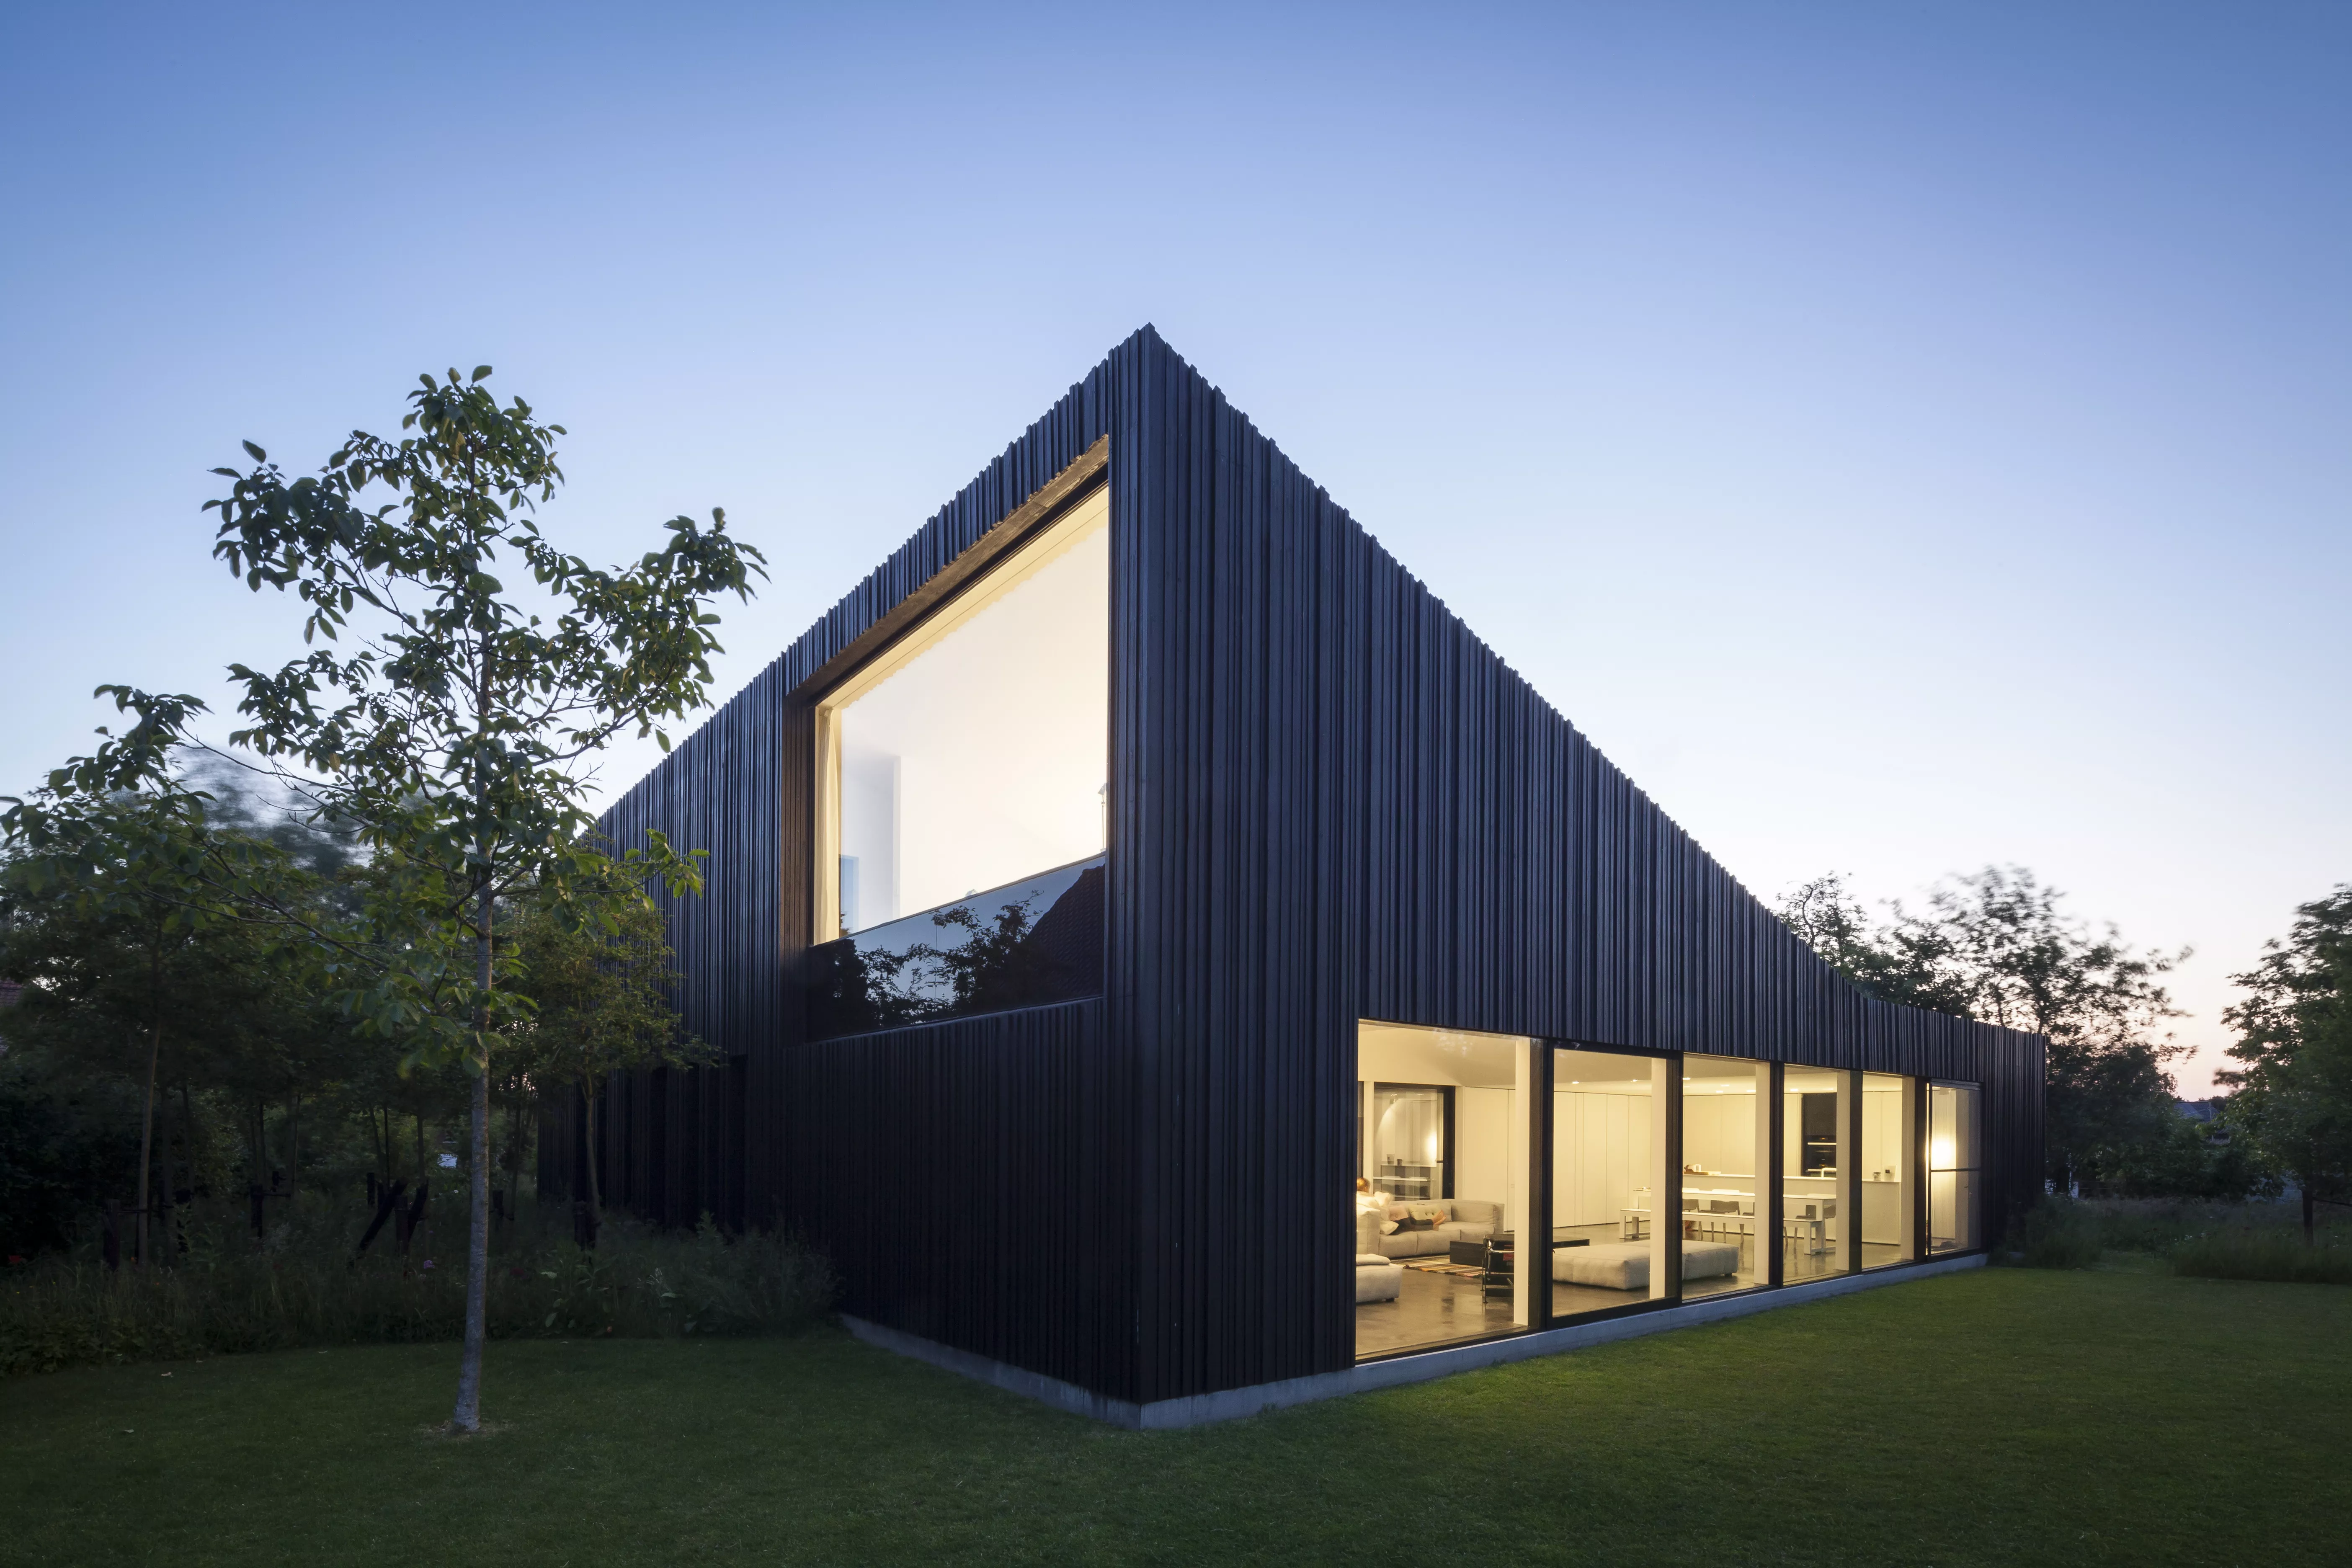  HIMACS chosen for the “TV House” in Belgium